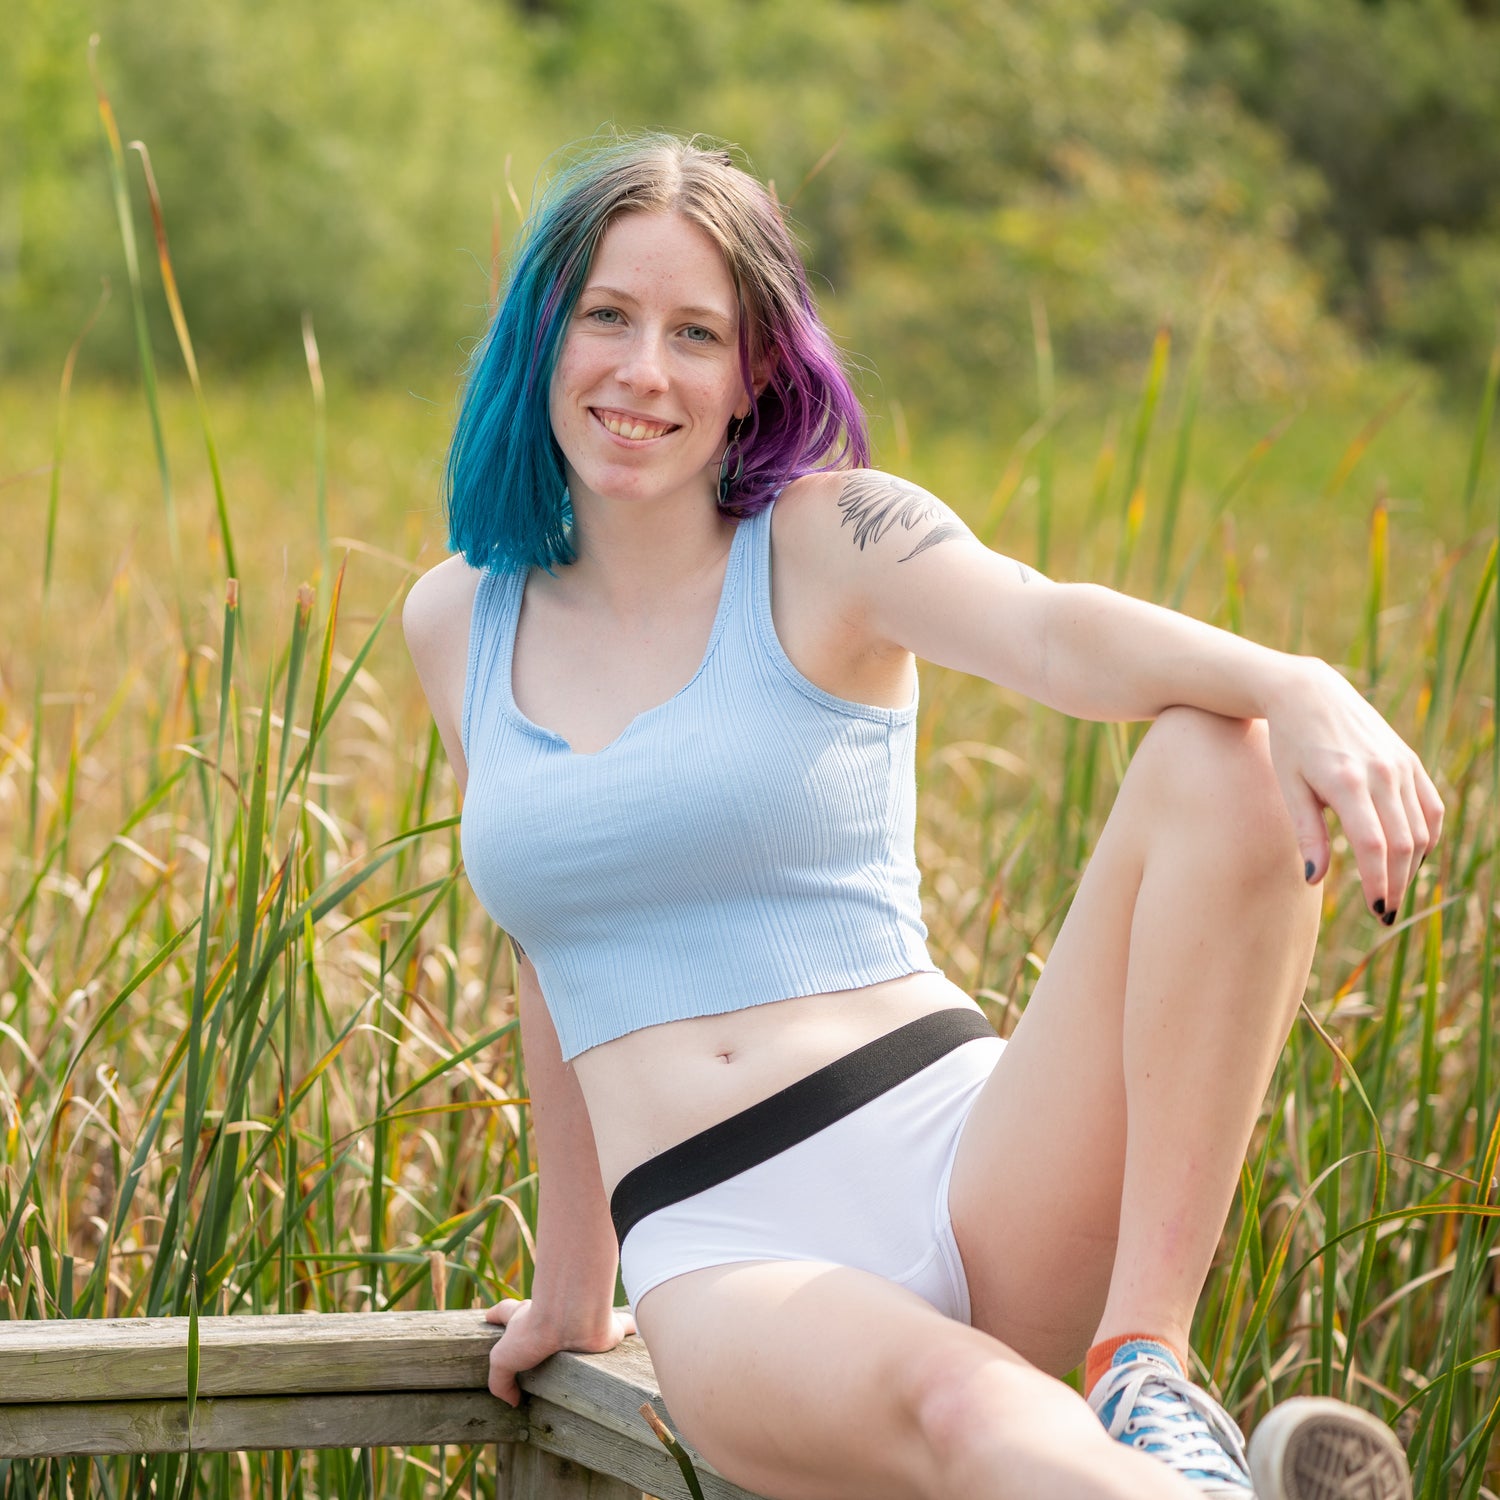 model with blue and purple hair sitting on a fence wearing light blue crop tank top and white do and dare cheeky underwear, smiling at camera